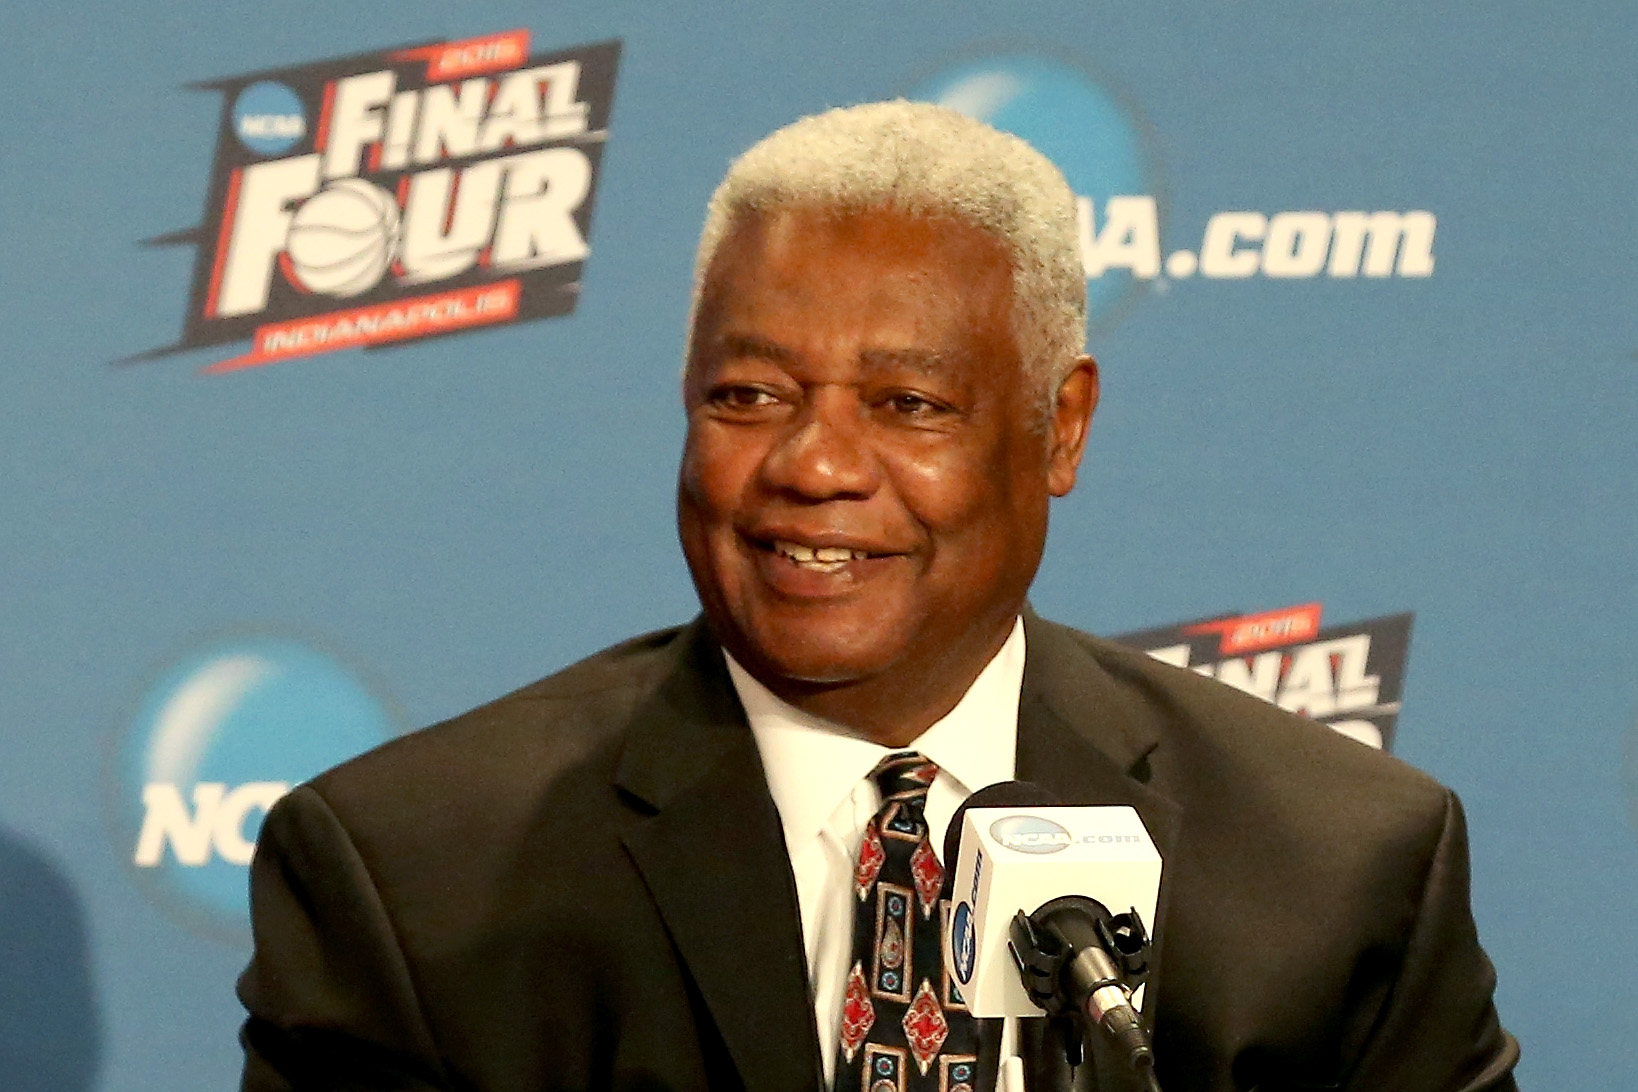 Oscar Robertson’s Lawsuit Against the NBA Changed the Way Players Get Paid